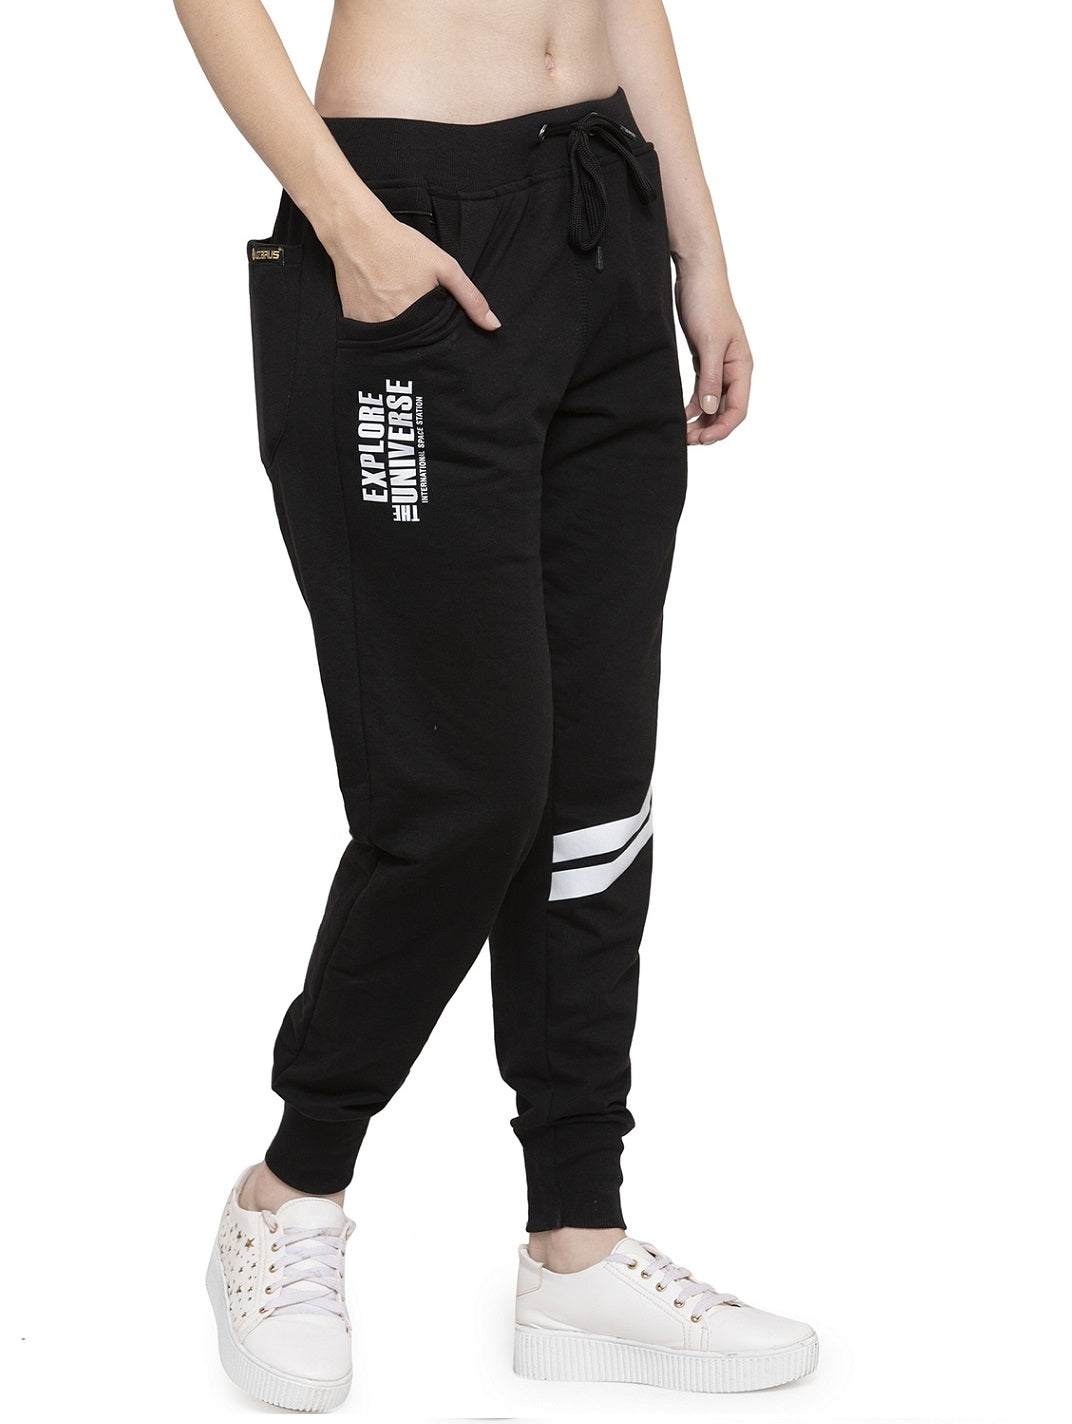 Buy Women's Sweatpants Workout Athletic Jogger Pants with Pocket